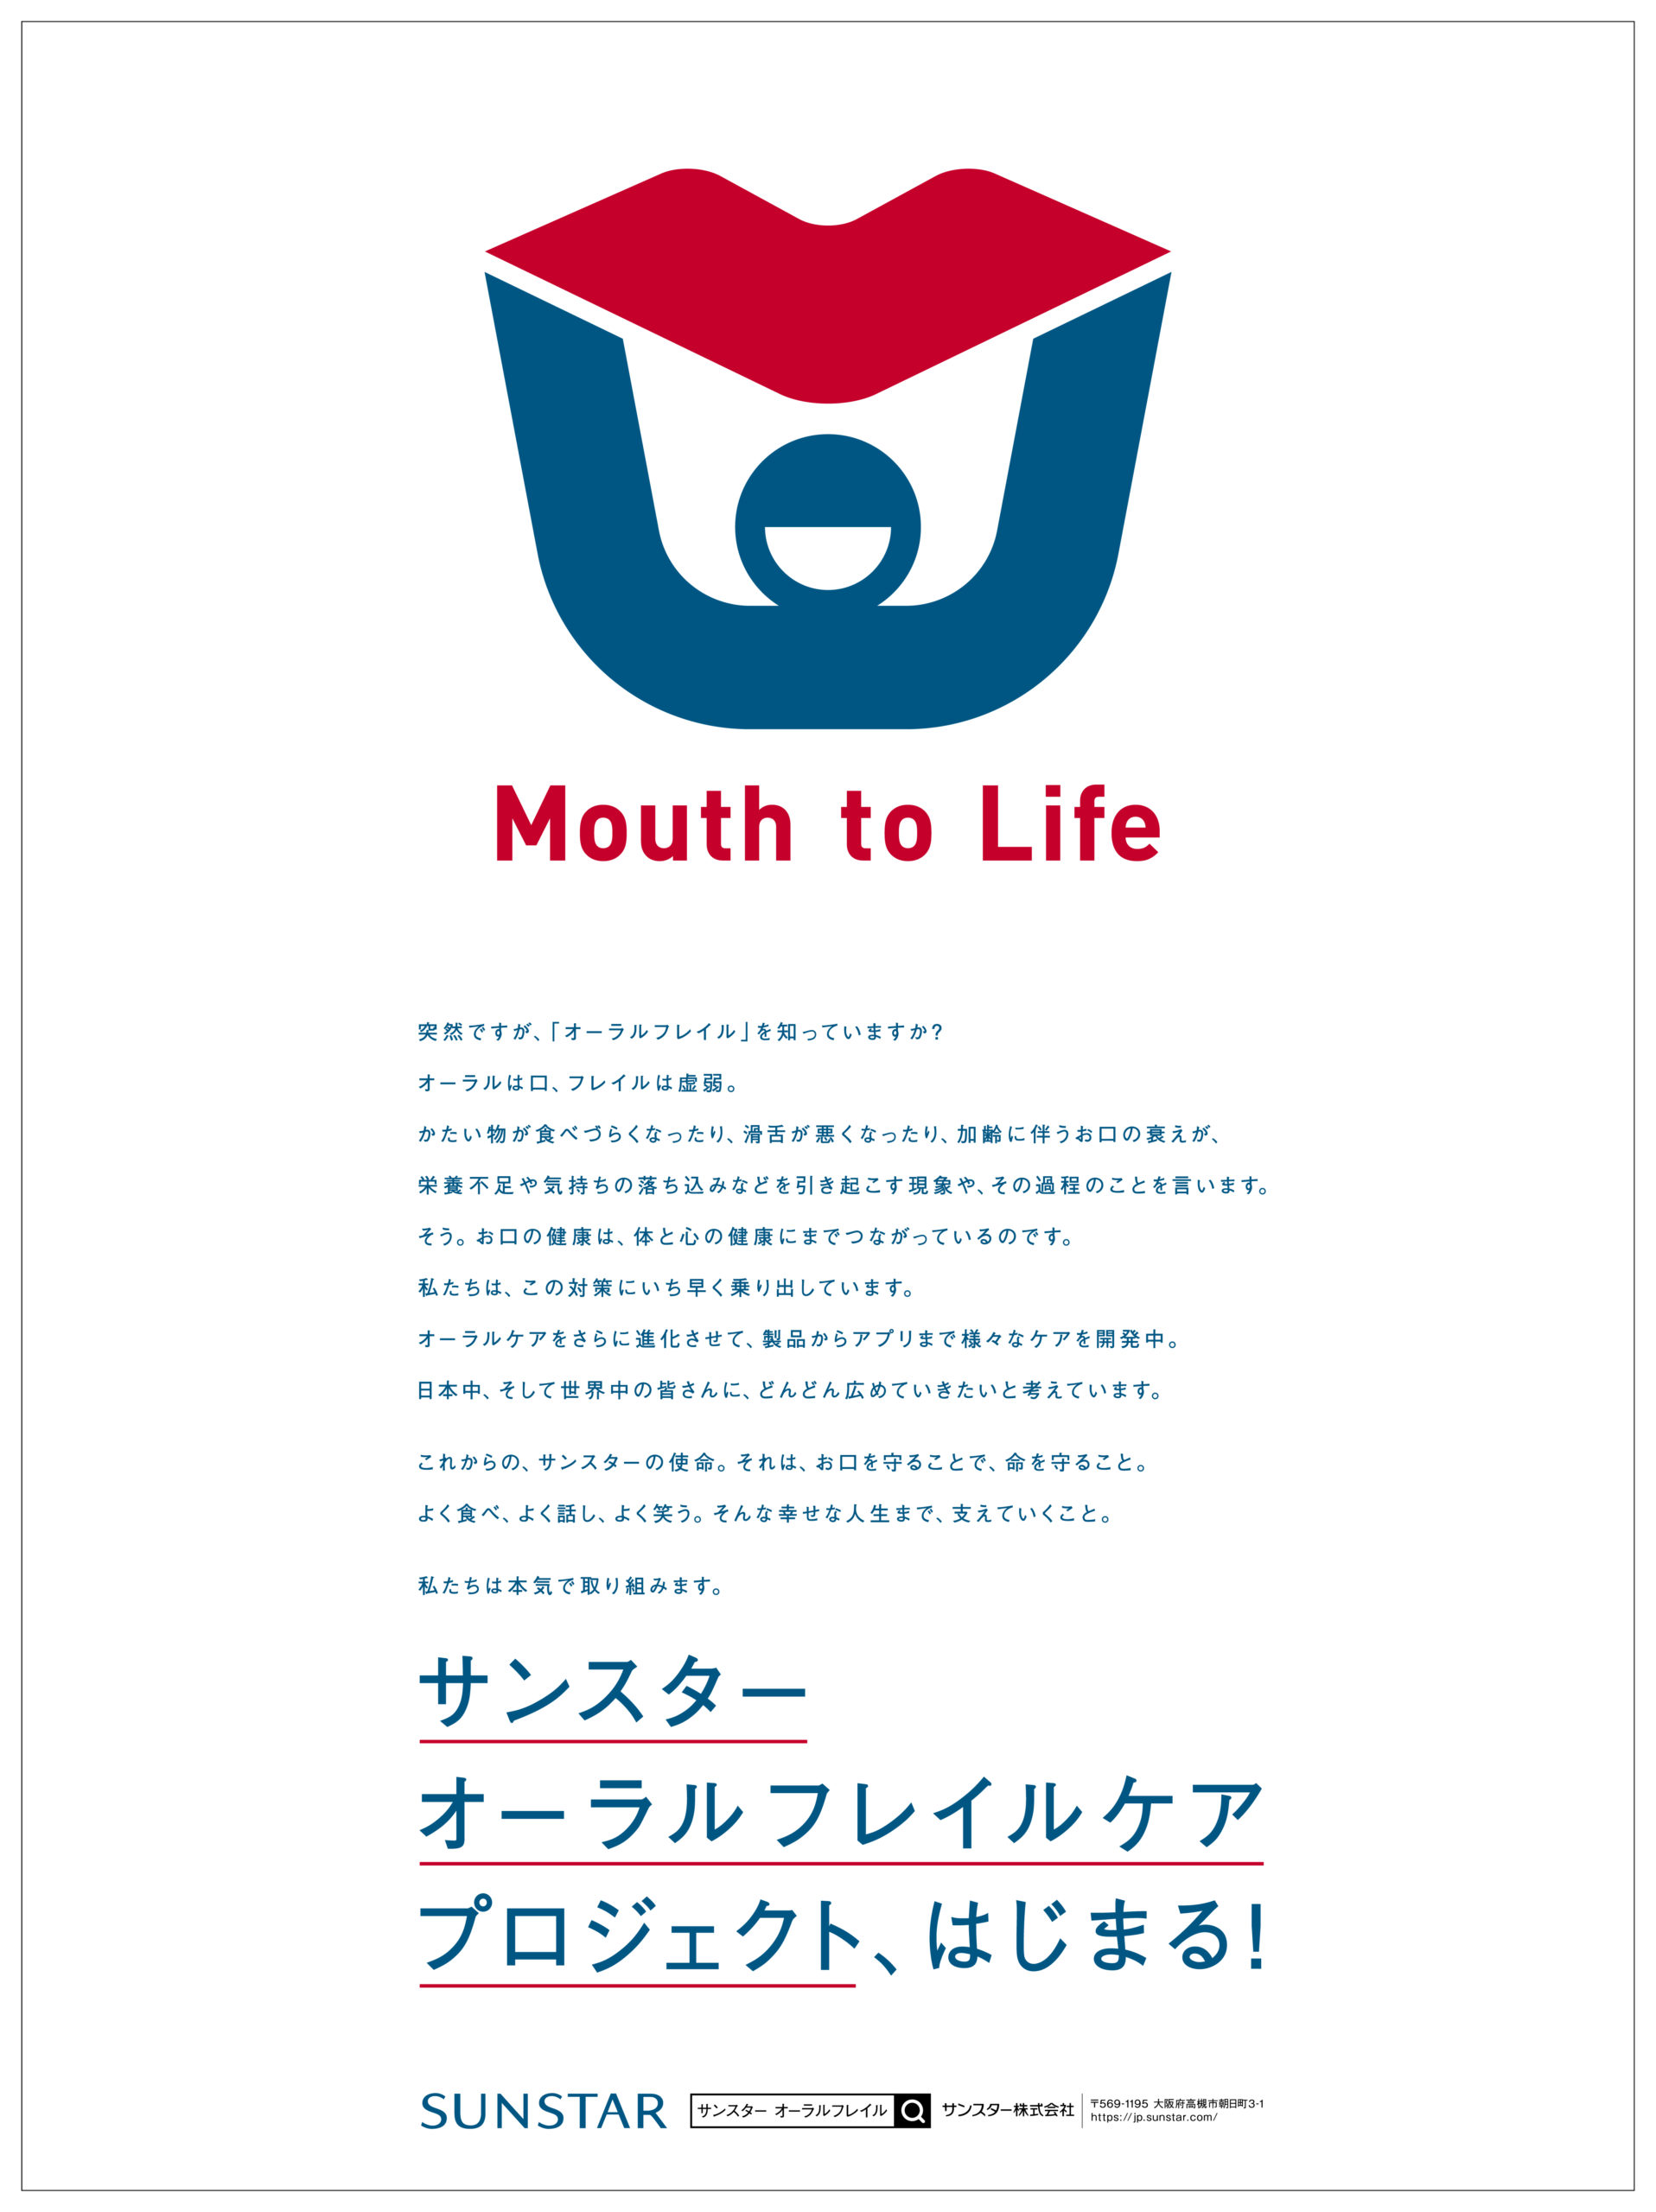 Mouth to Life